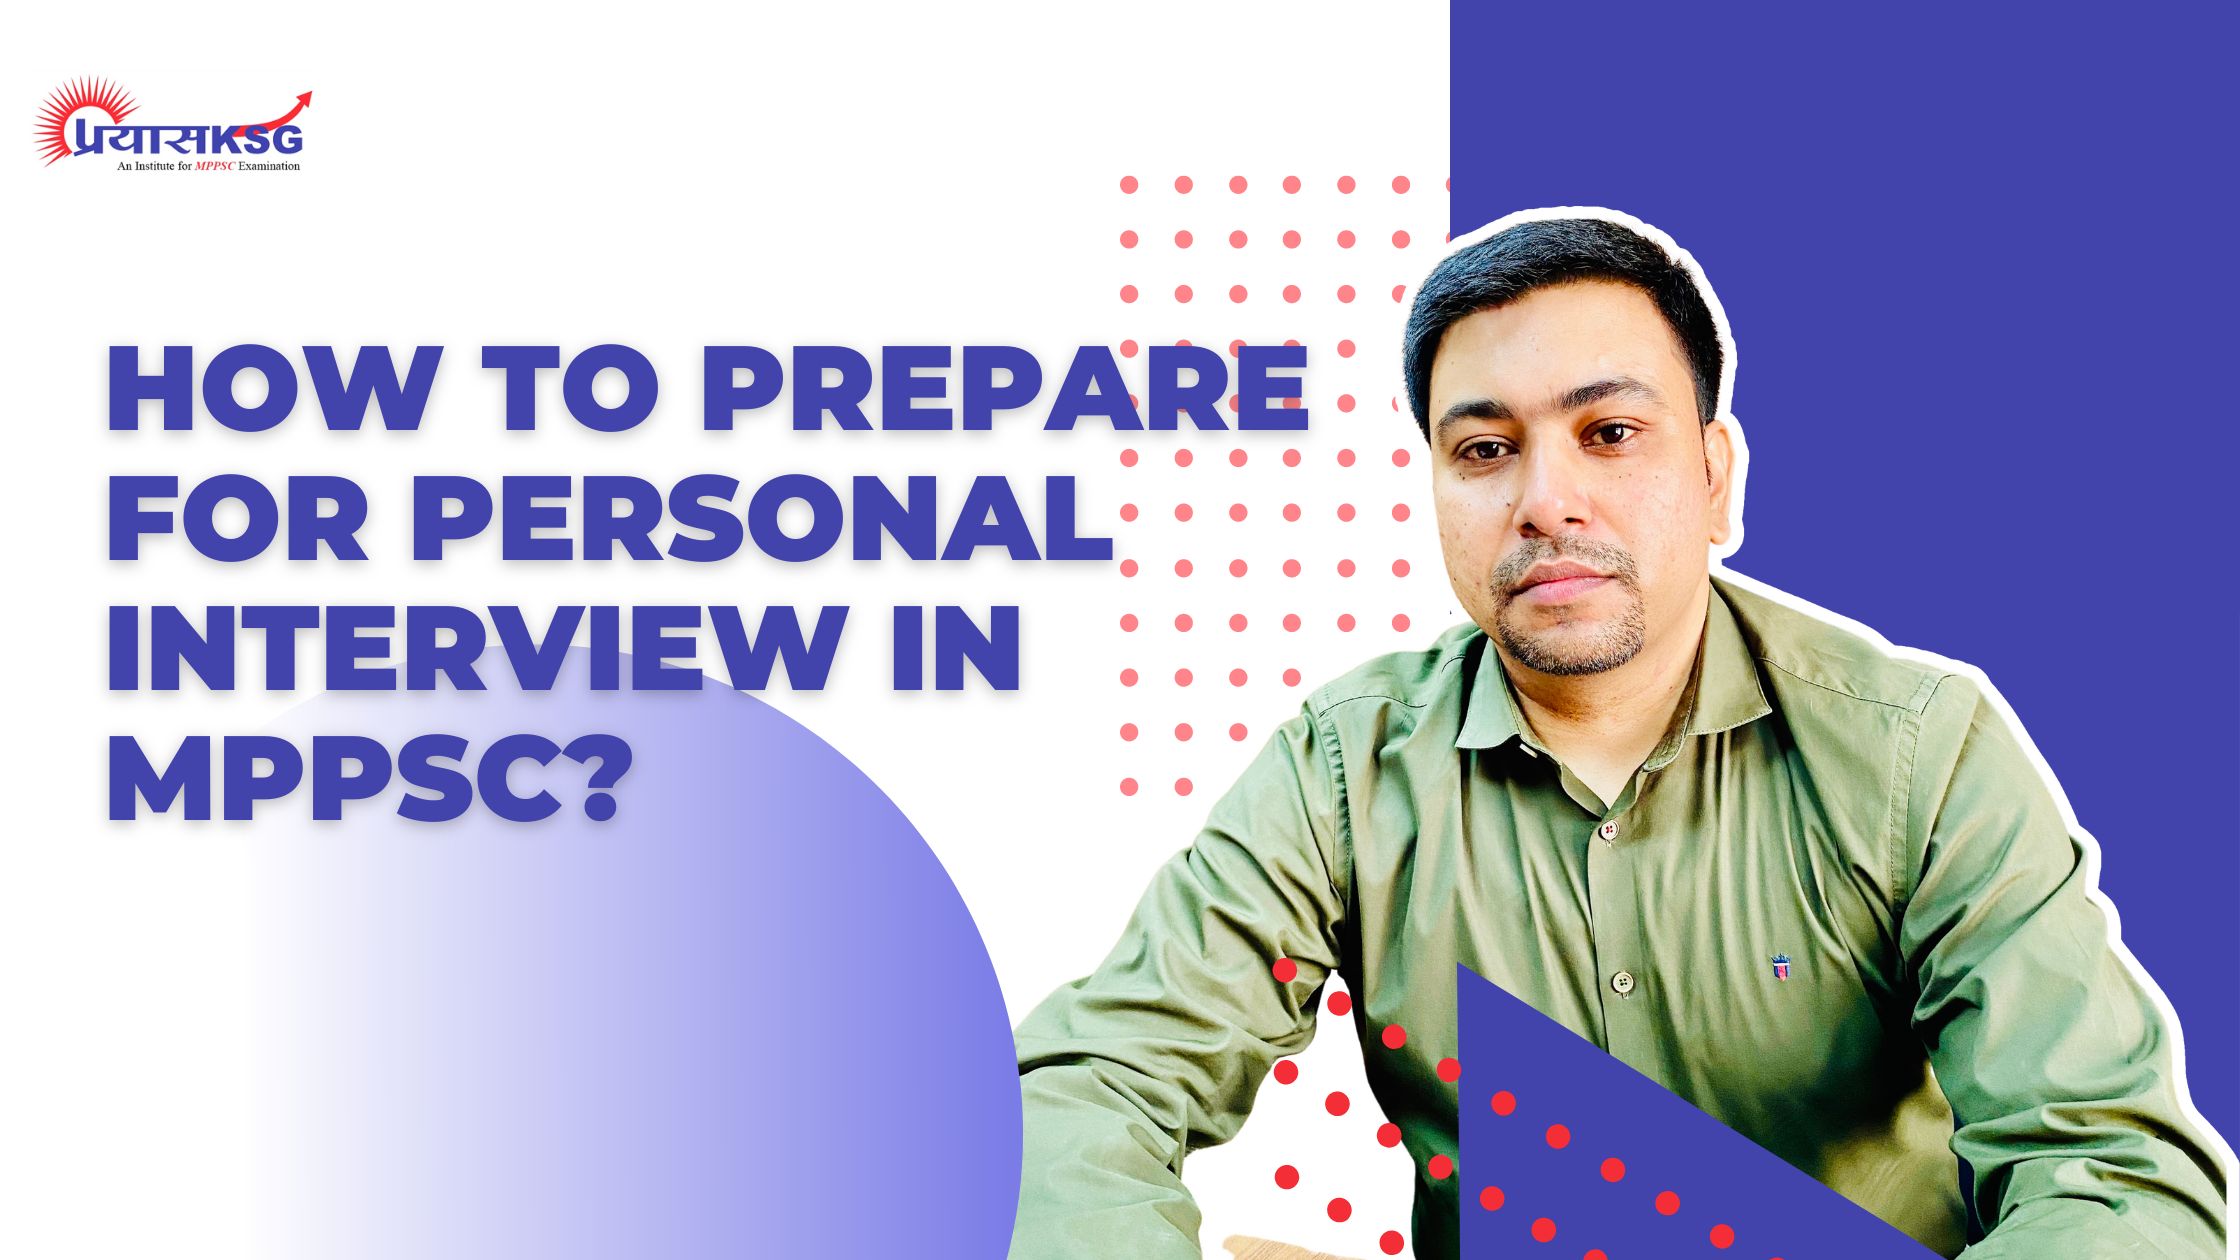 How to prepare for personal interview in MPPSC?